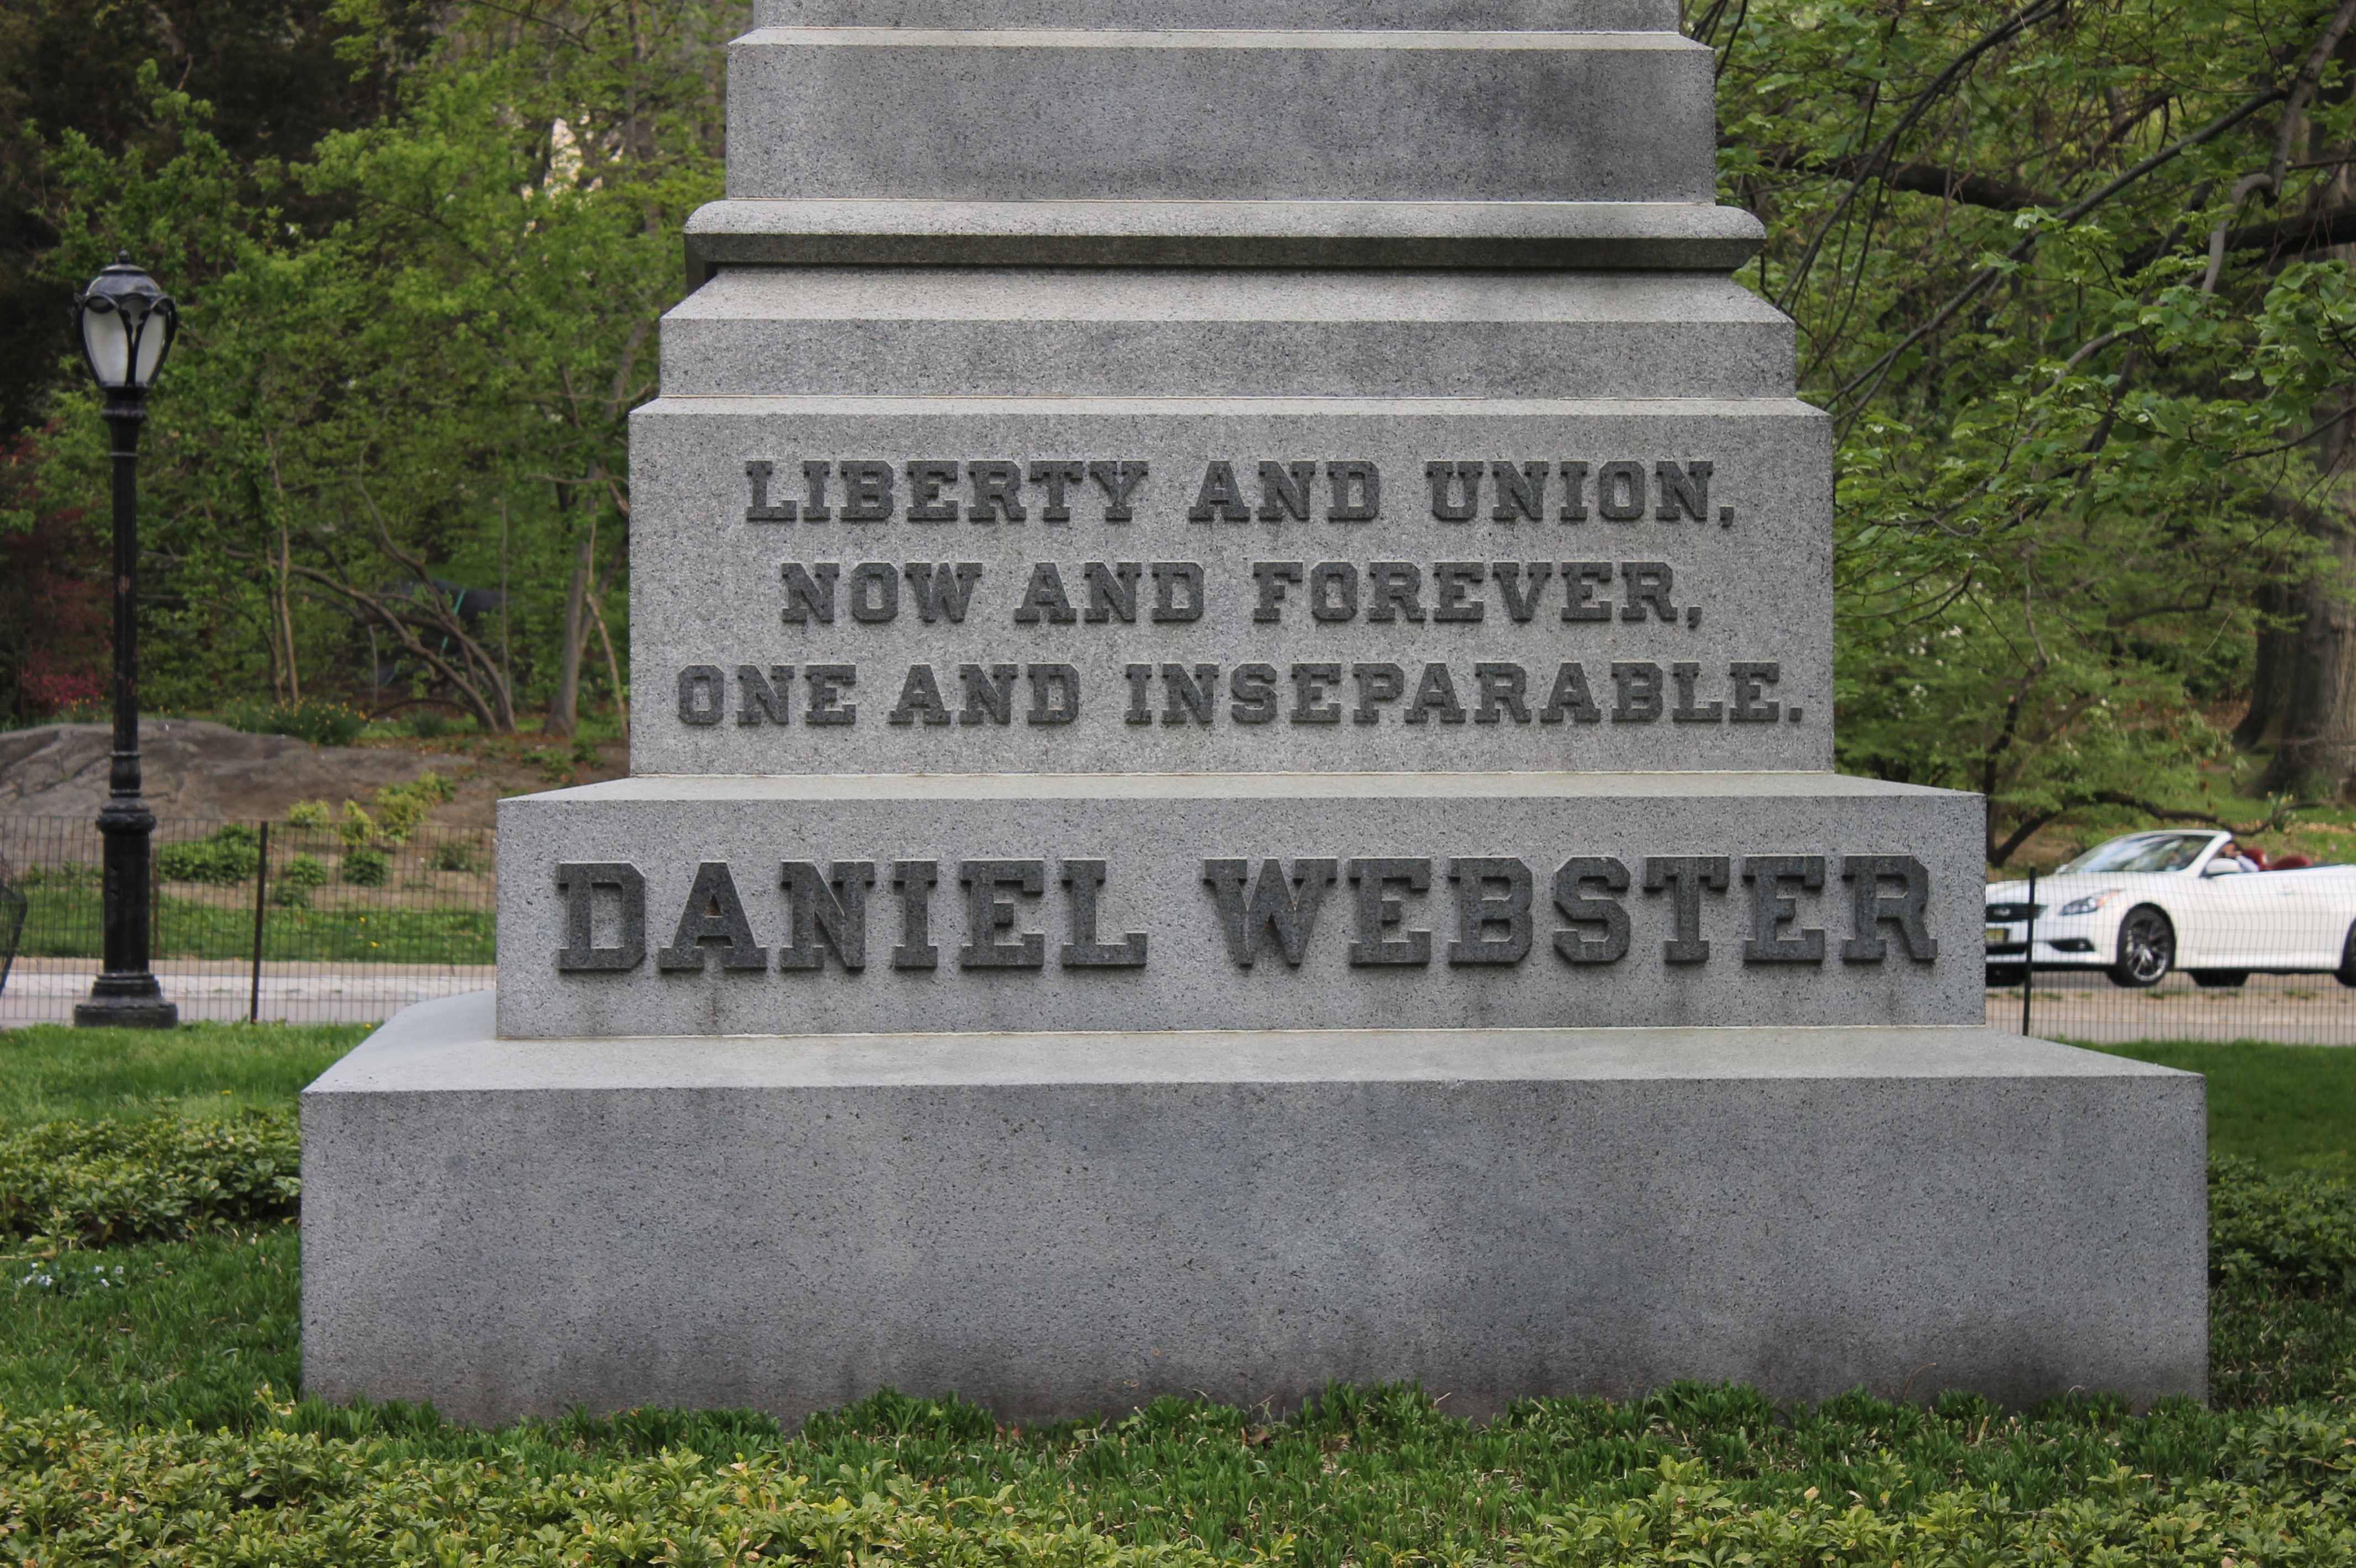 Daniel Webster monument in Central Park, New York City. Photo taken on May 5, 2015.